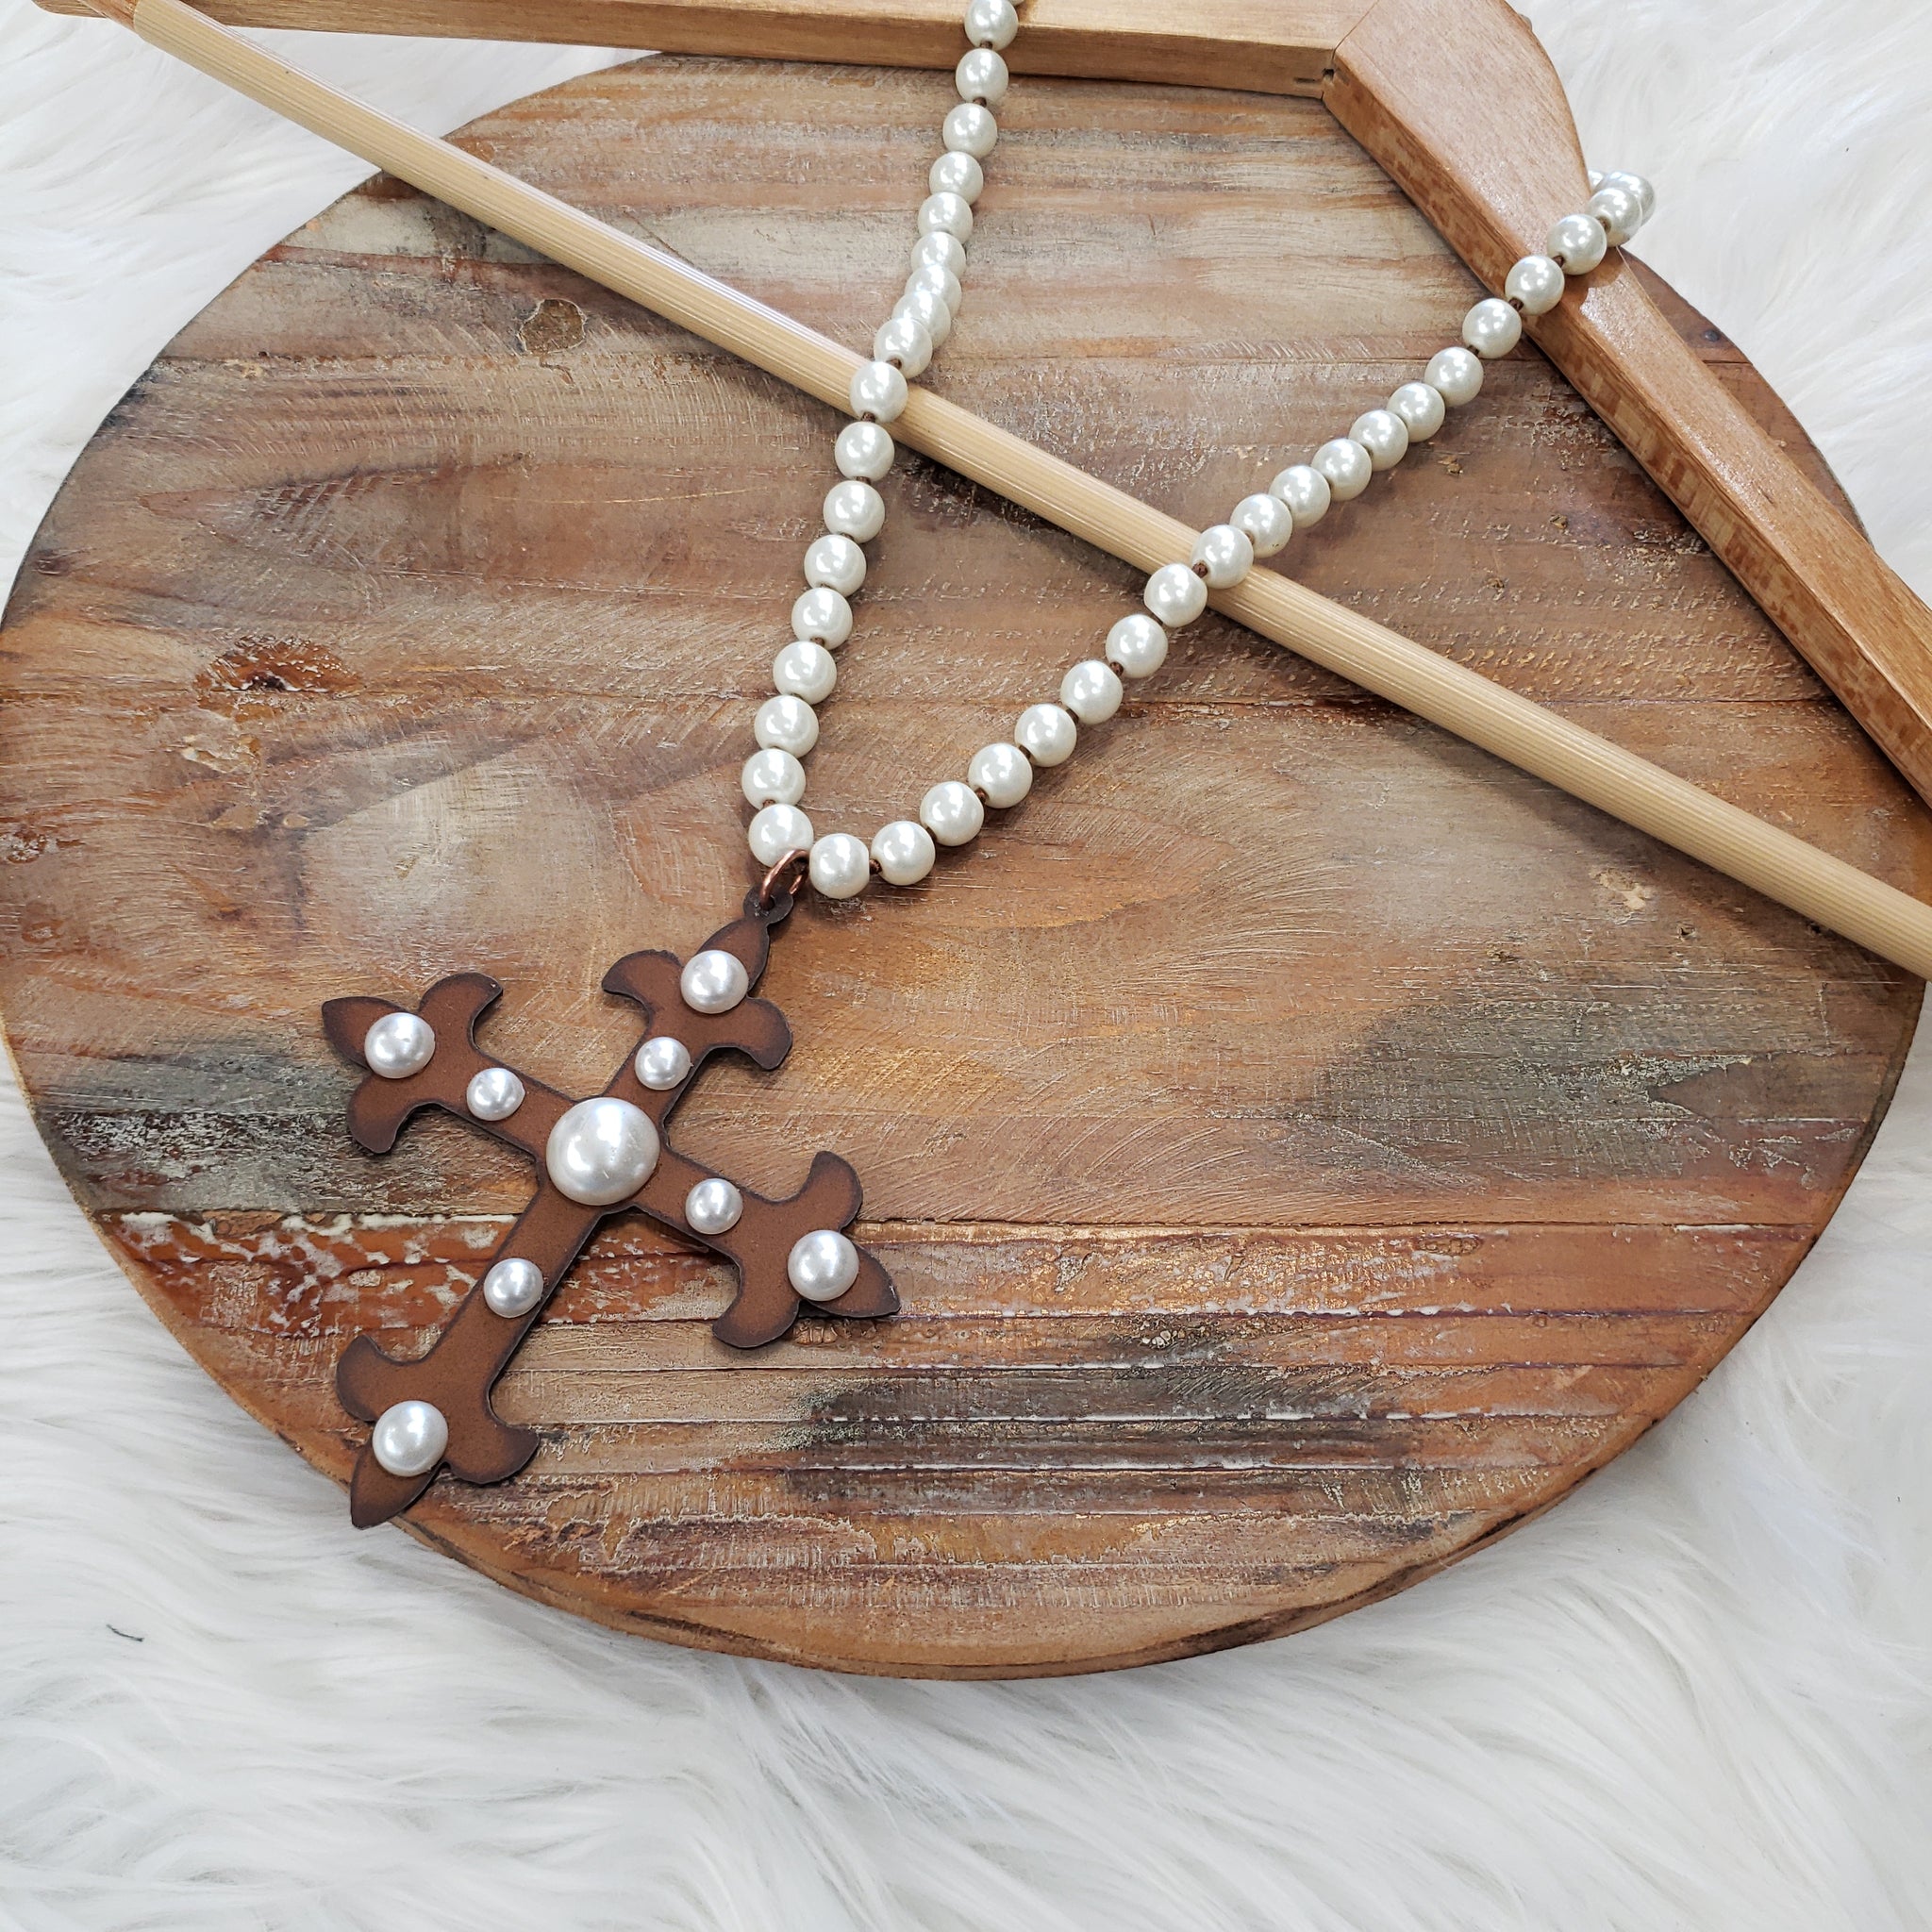 The Pearl Cross Knot Necklace